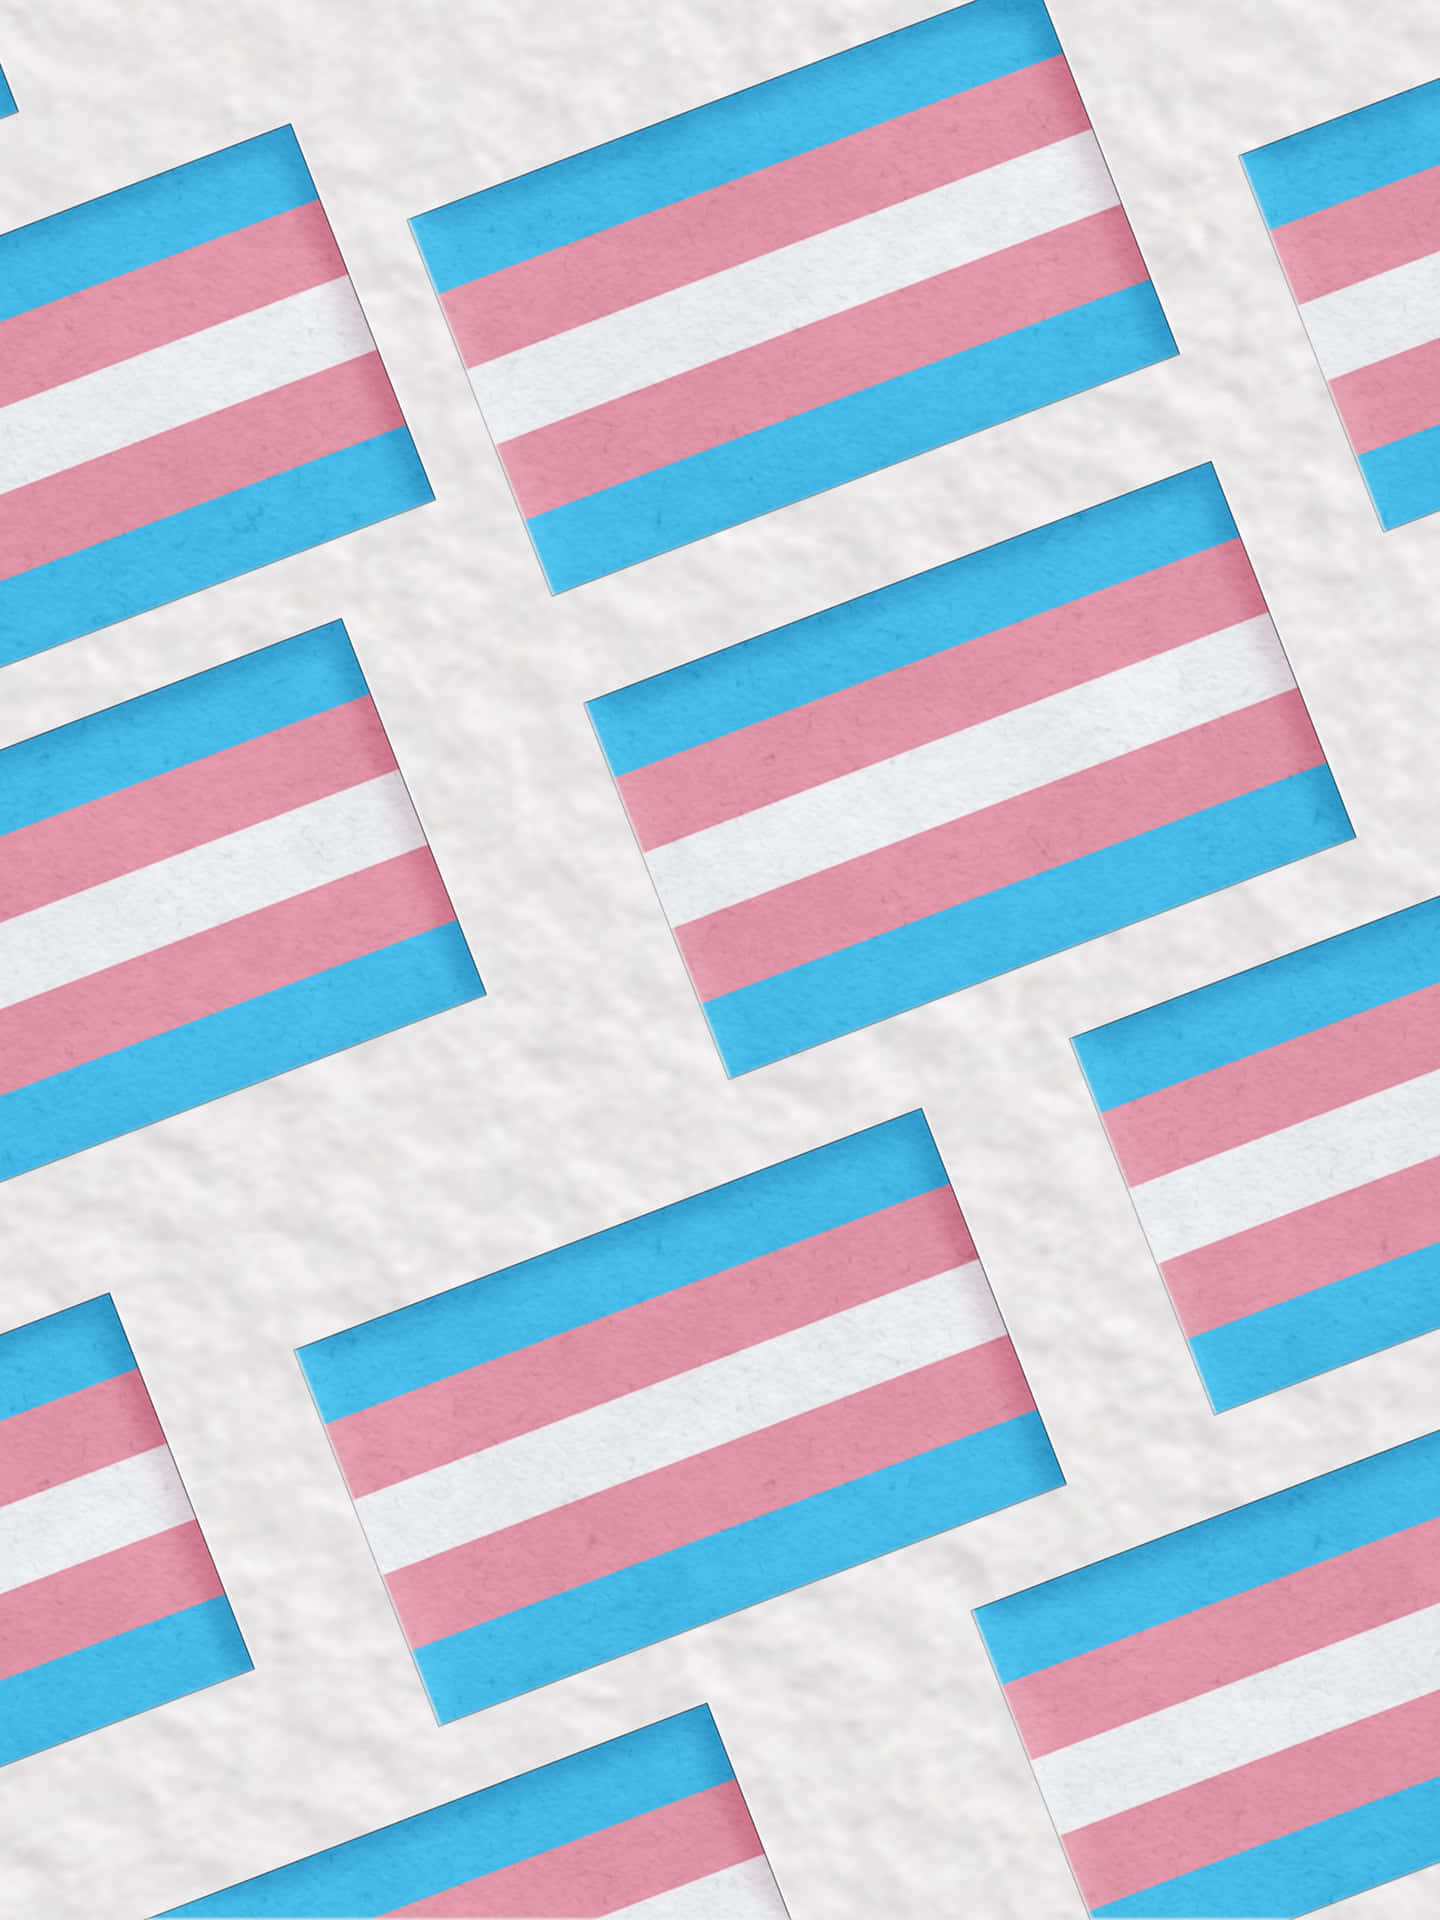 Show your pride and support to the transgender community with the Trans Flag. Wallpaper